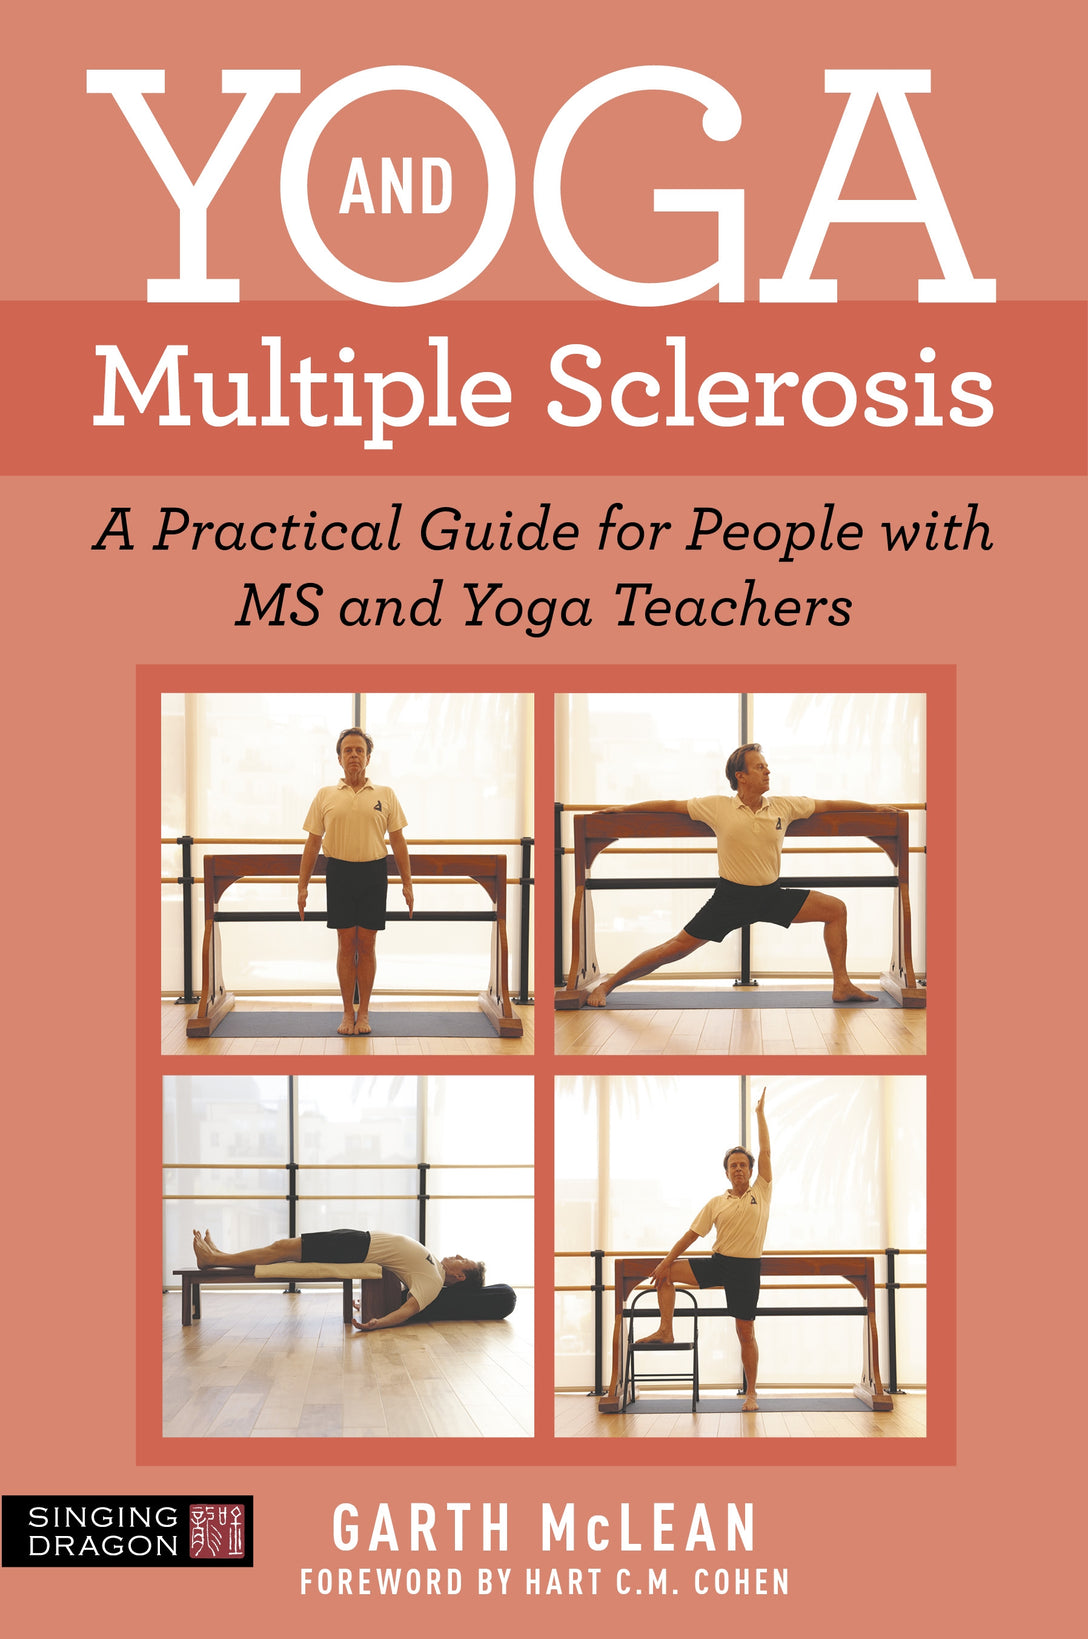 Yoga and Multiple Sclerosis by Hart C.M. Cohen, Garth McLean